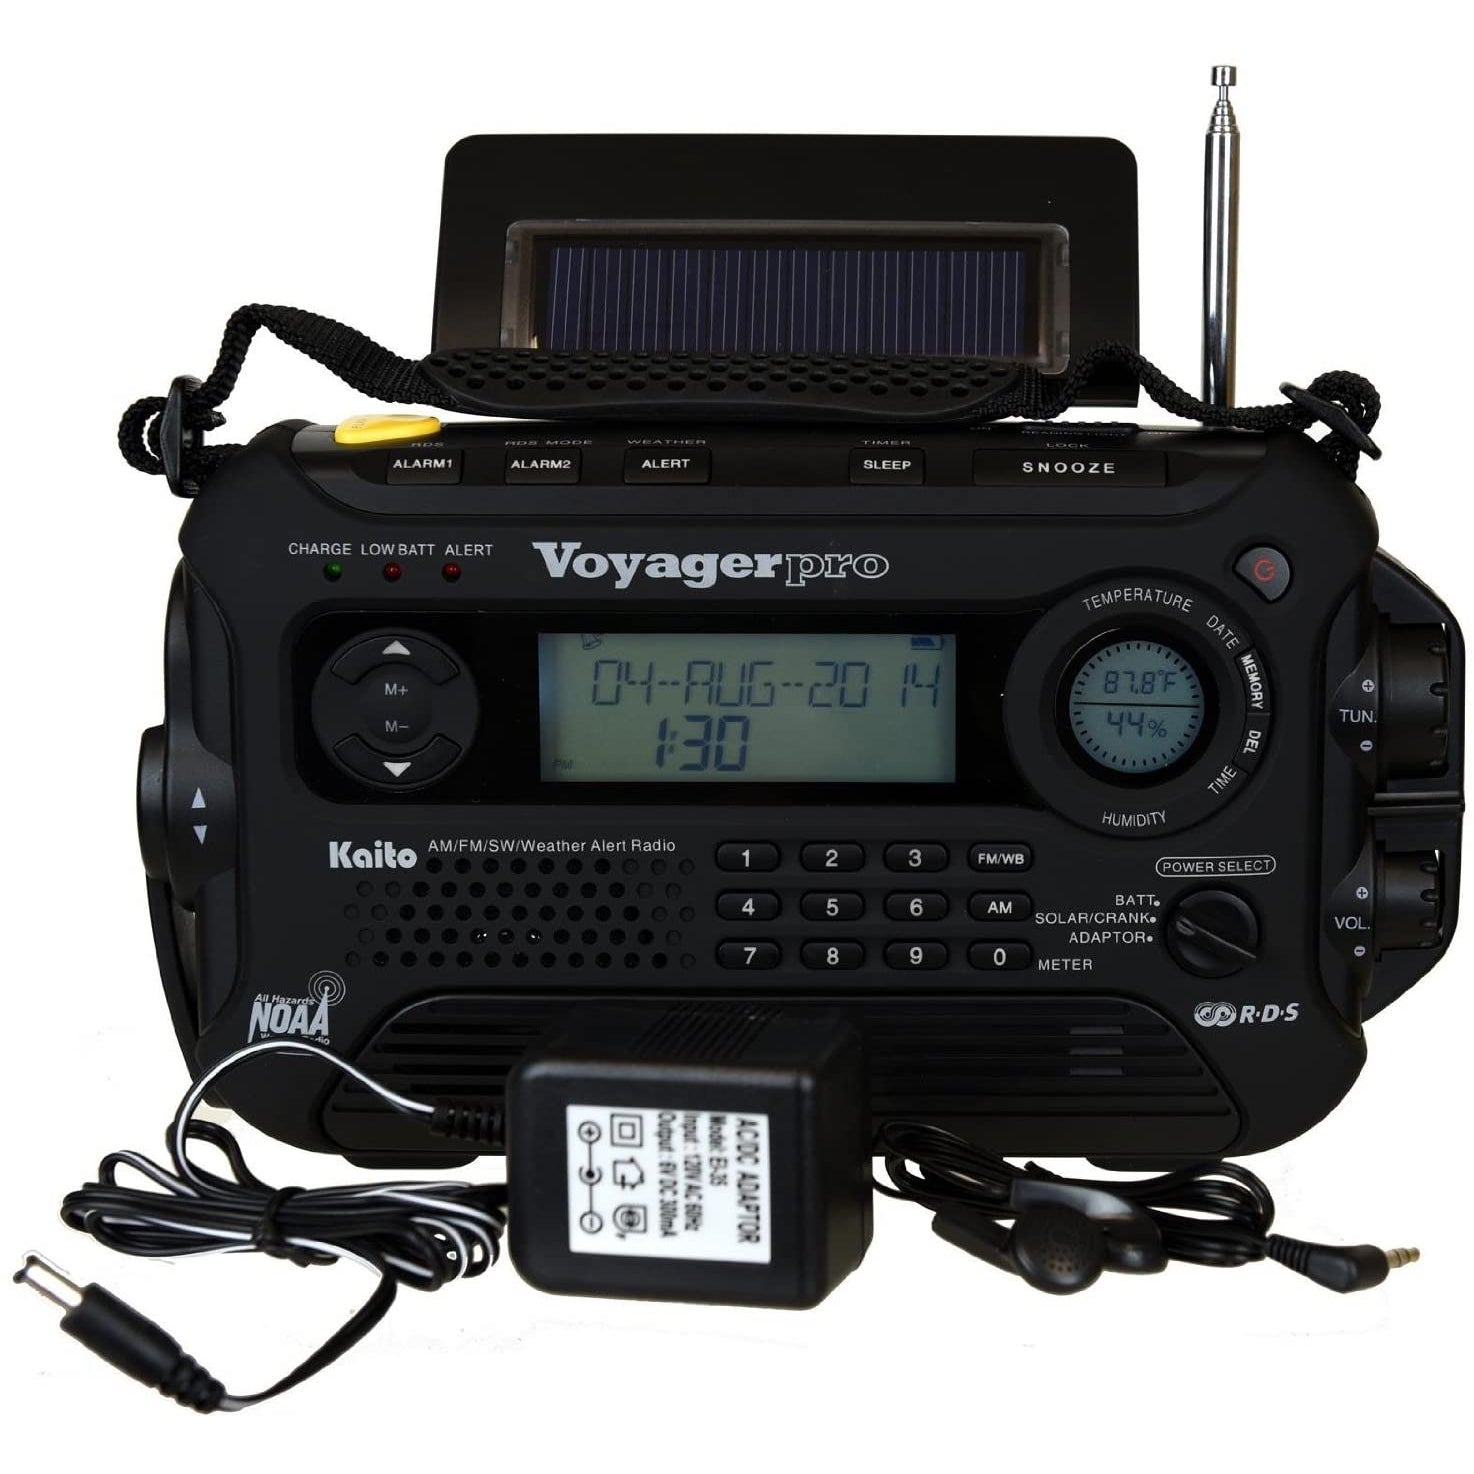 4-IN-1 Emergency Dynamo AM/FM Radio With Phone Charger